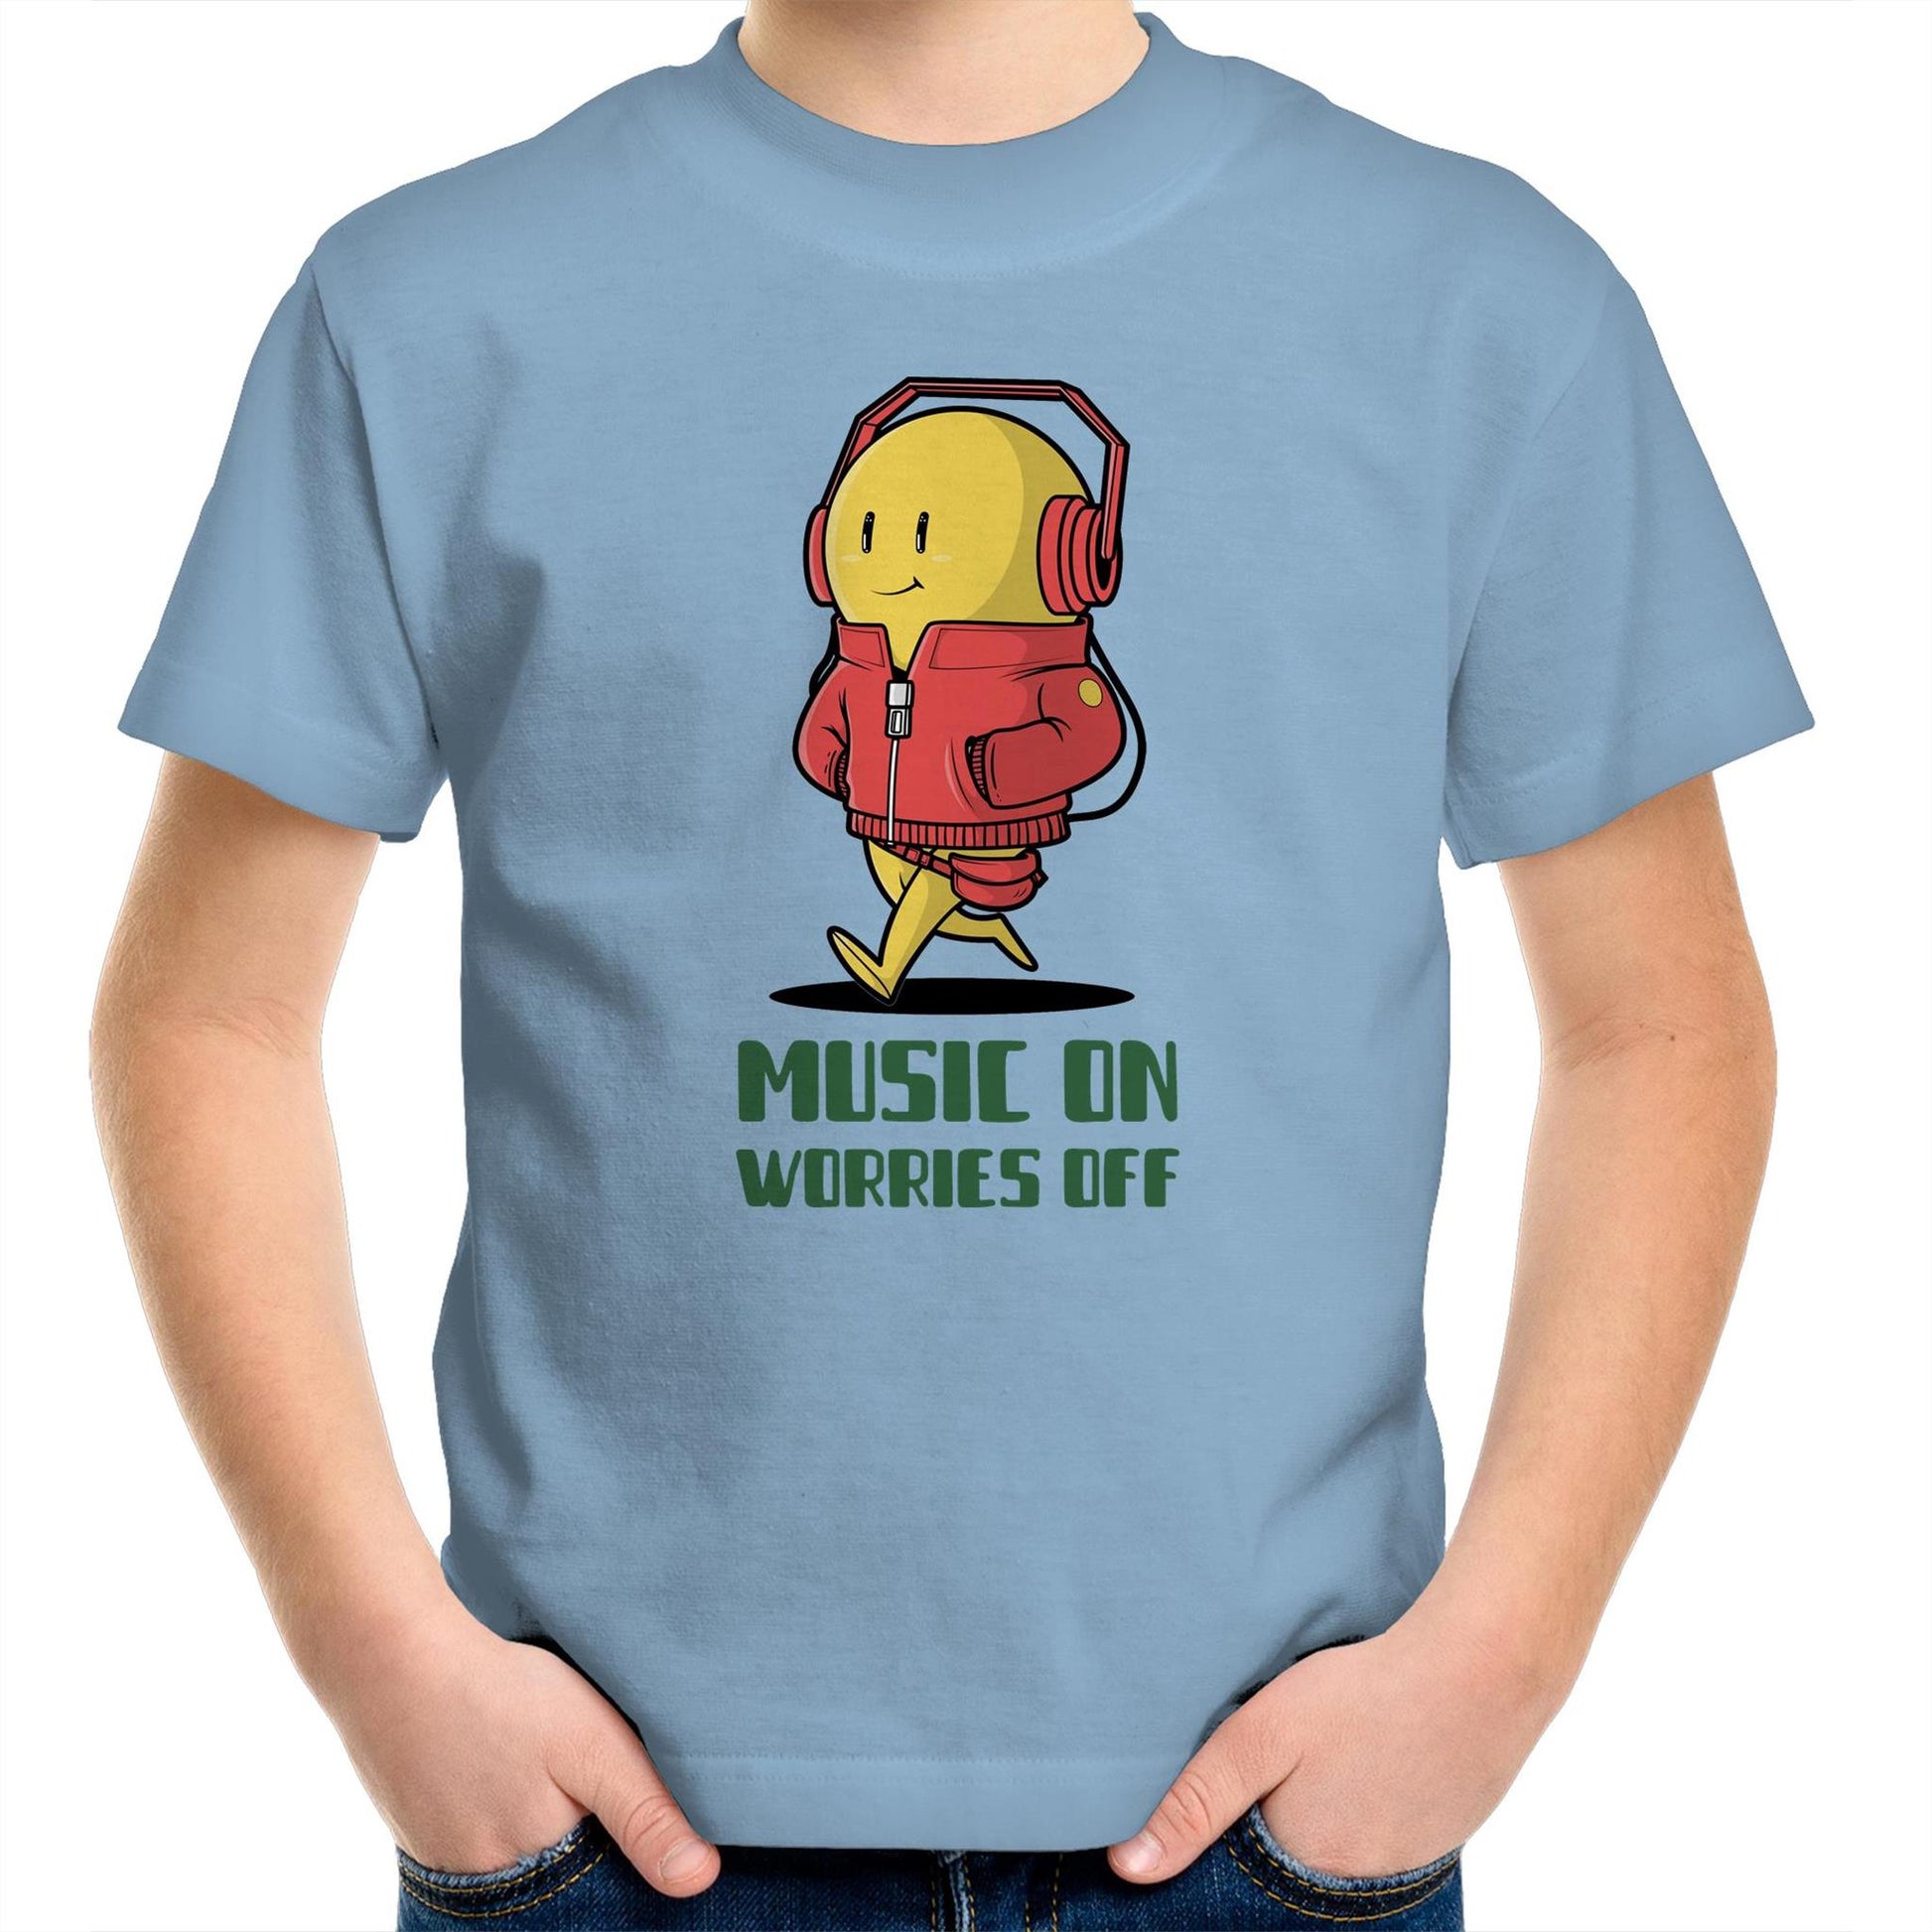 Music On, Worries Off - Kids Youth T-Shirt Carolina Blue Kids Youth T-shirt Music